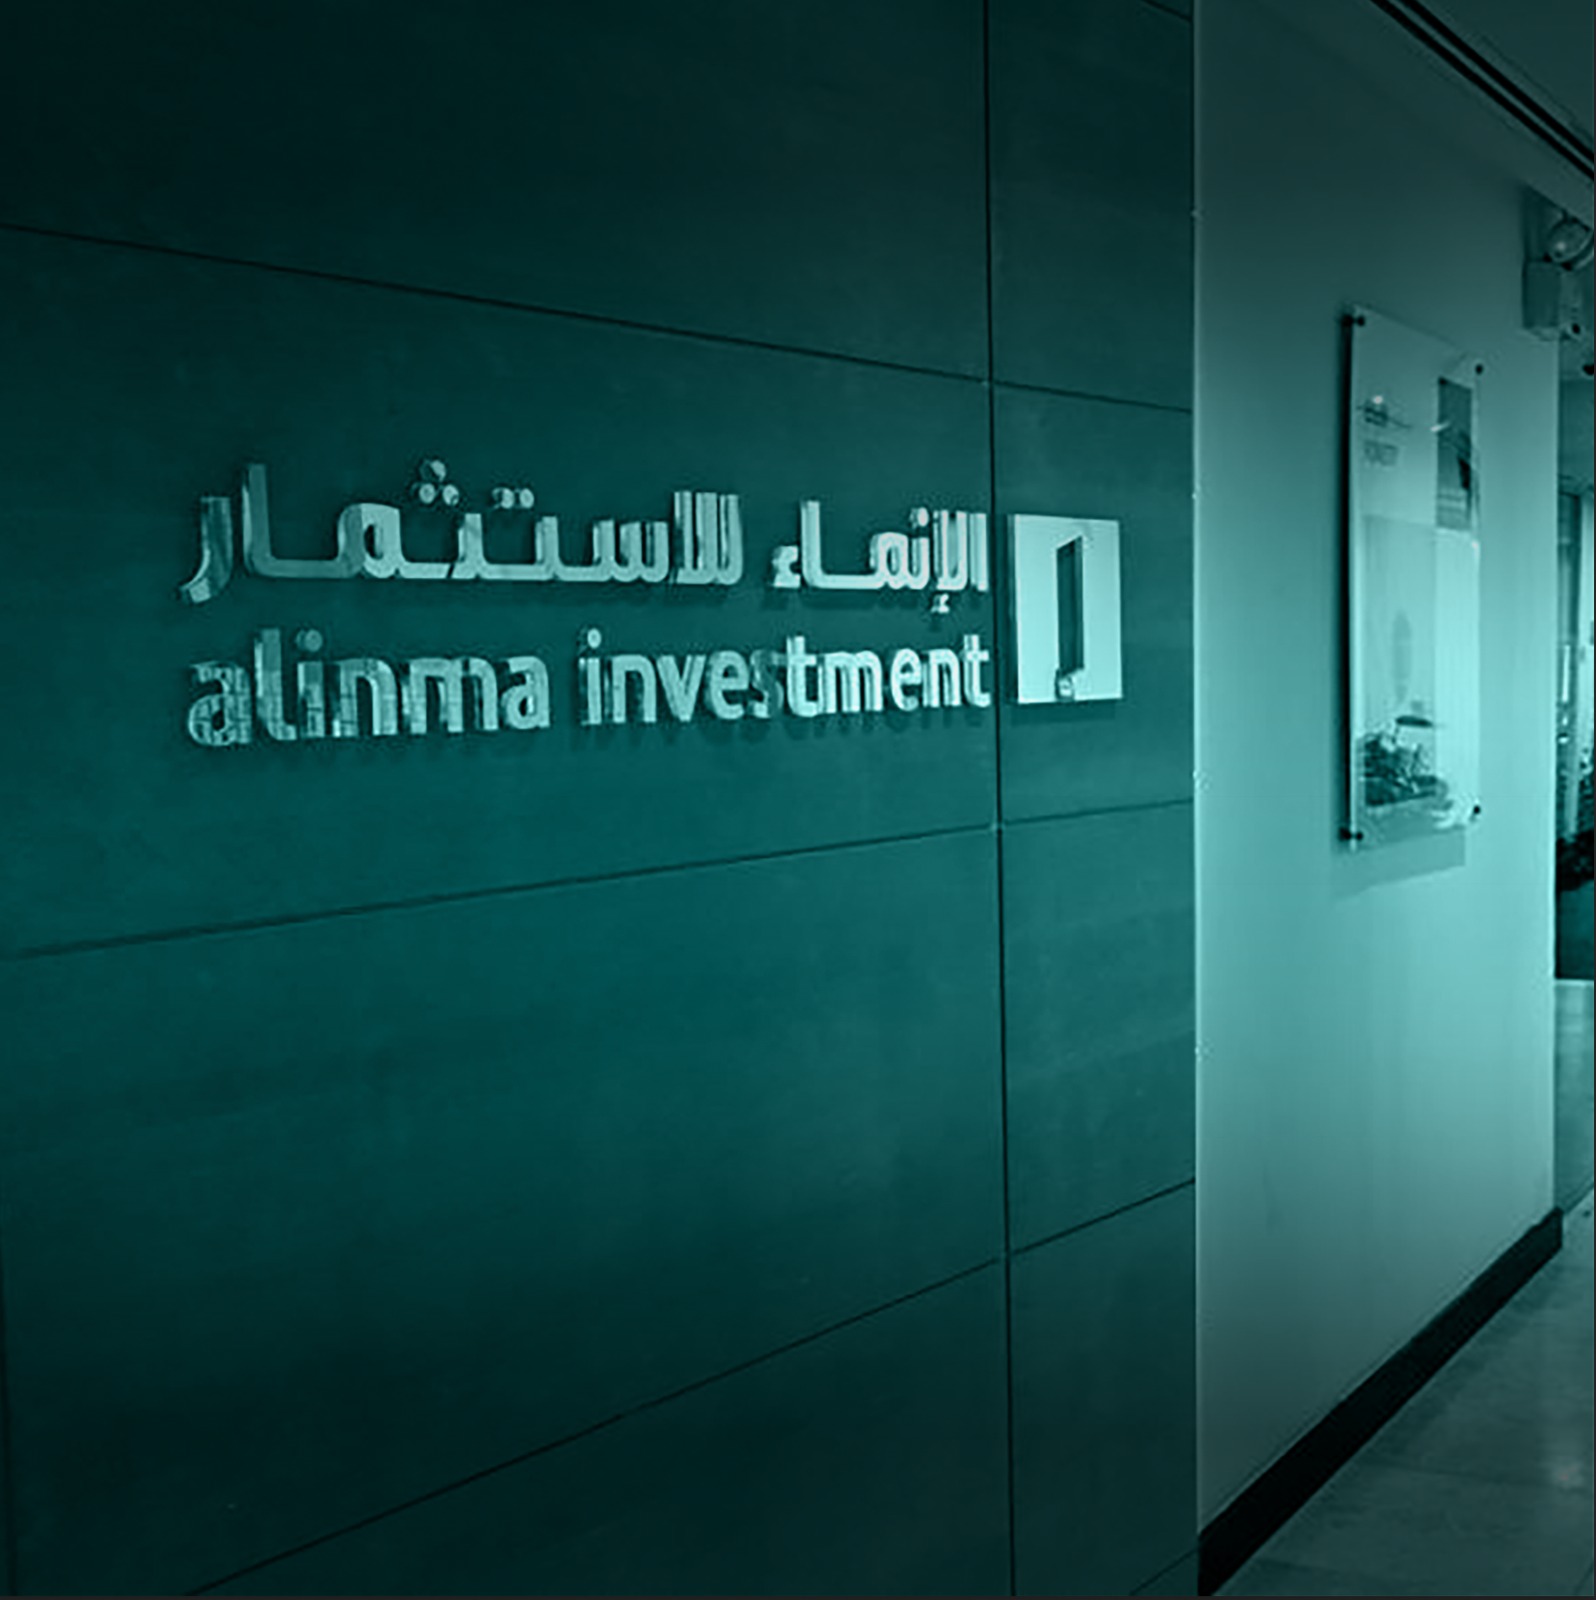 Announcement by Alinma Investment Company regarding a material development of Alinma Hospitality REIT Fund